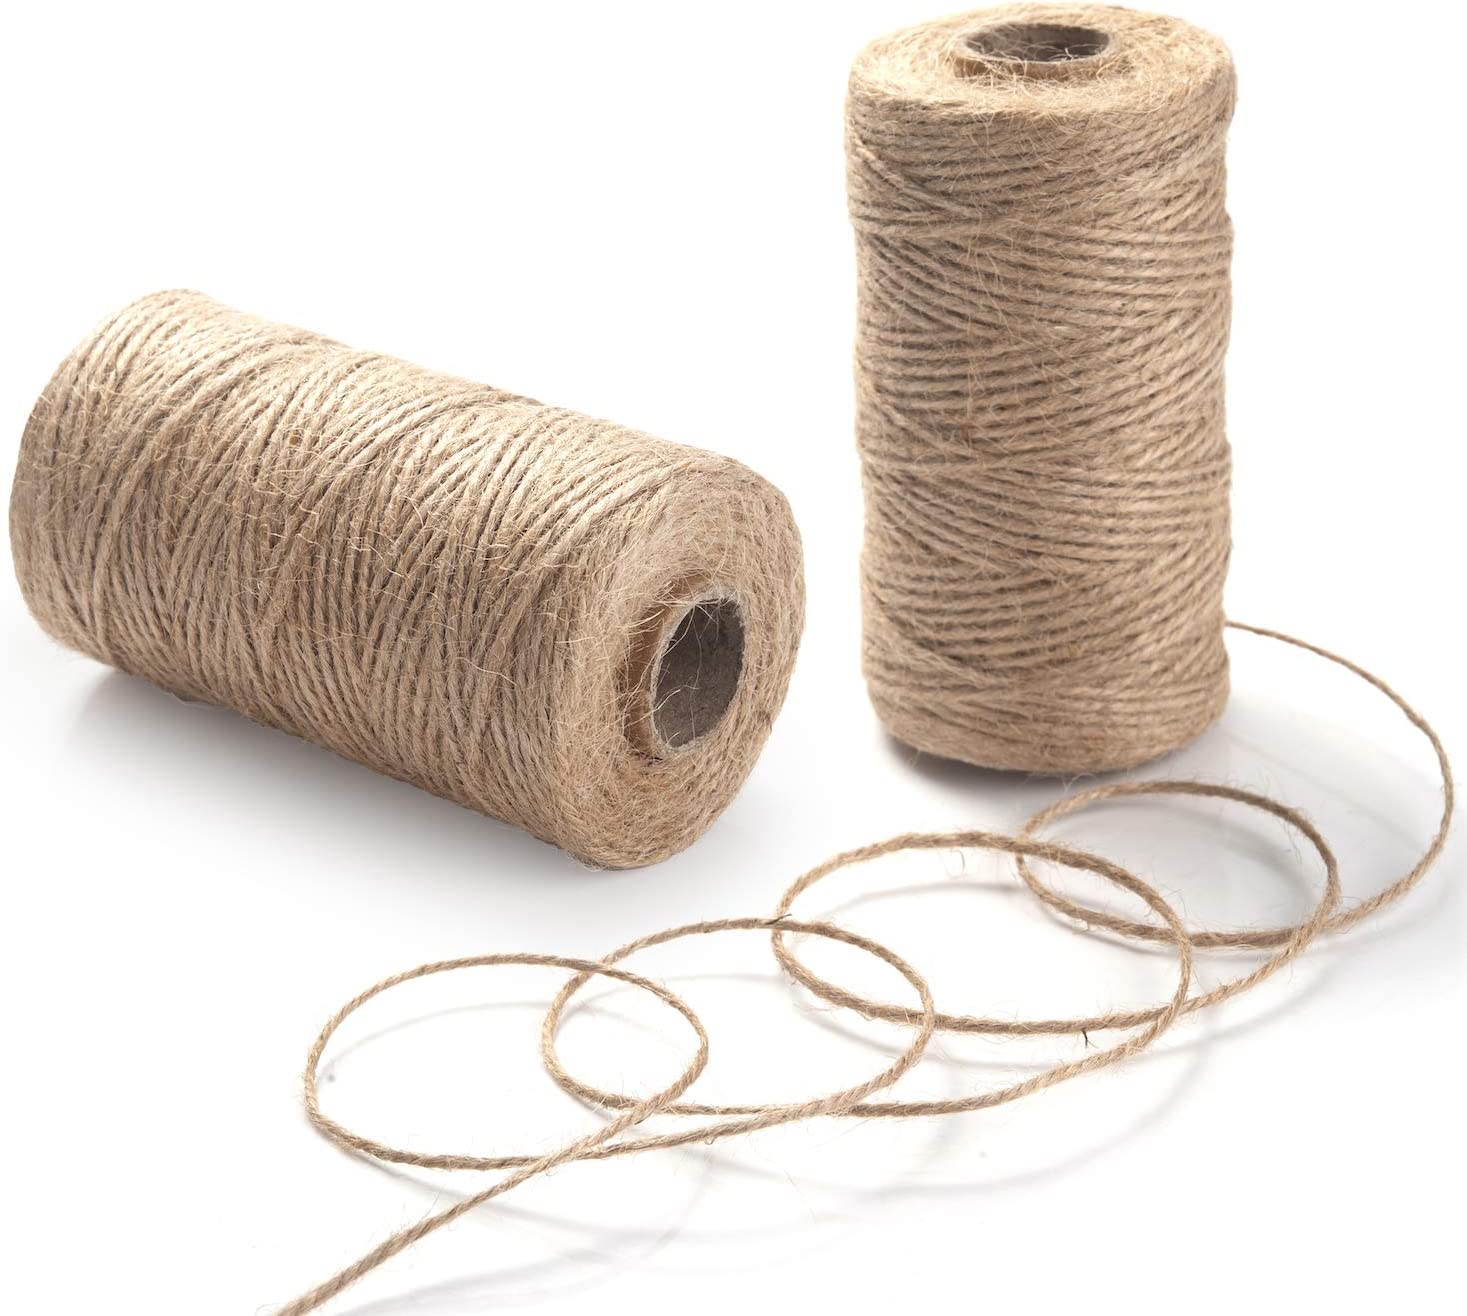 Jute Rope 2mm Heavy Duty Twine for Crafts Packing Gift Box Burlap